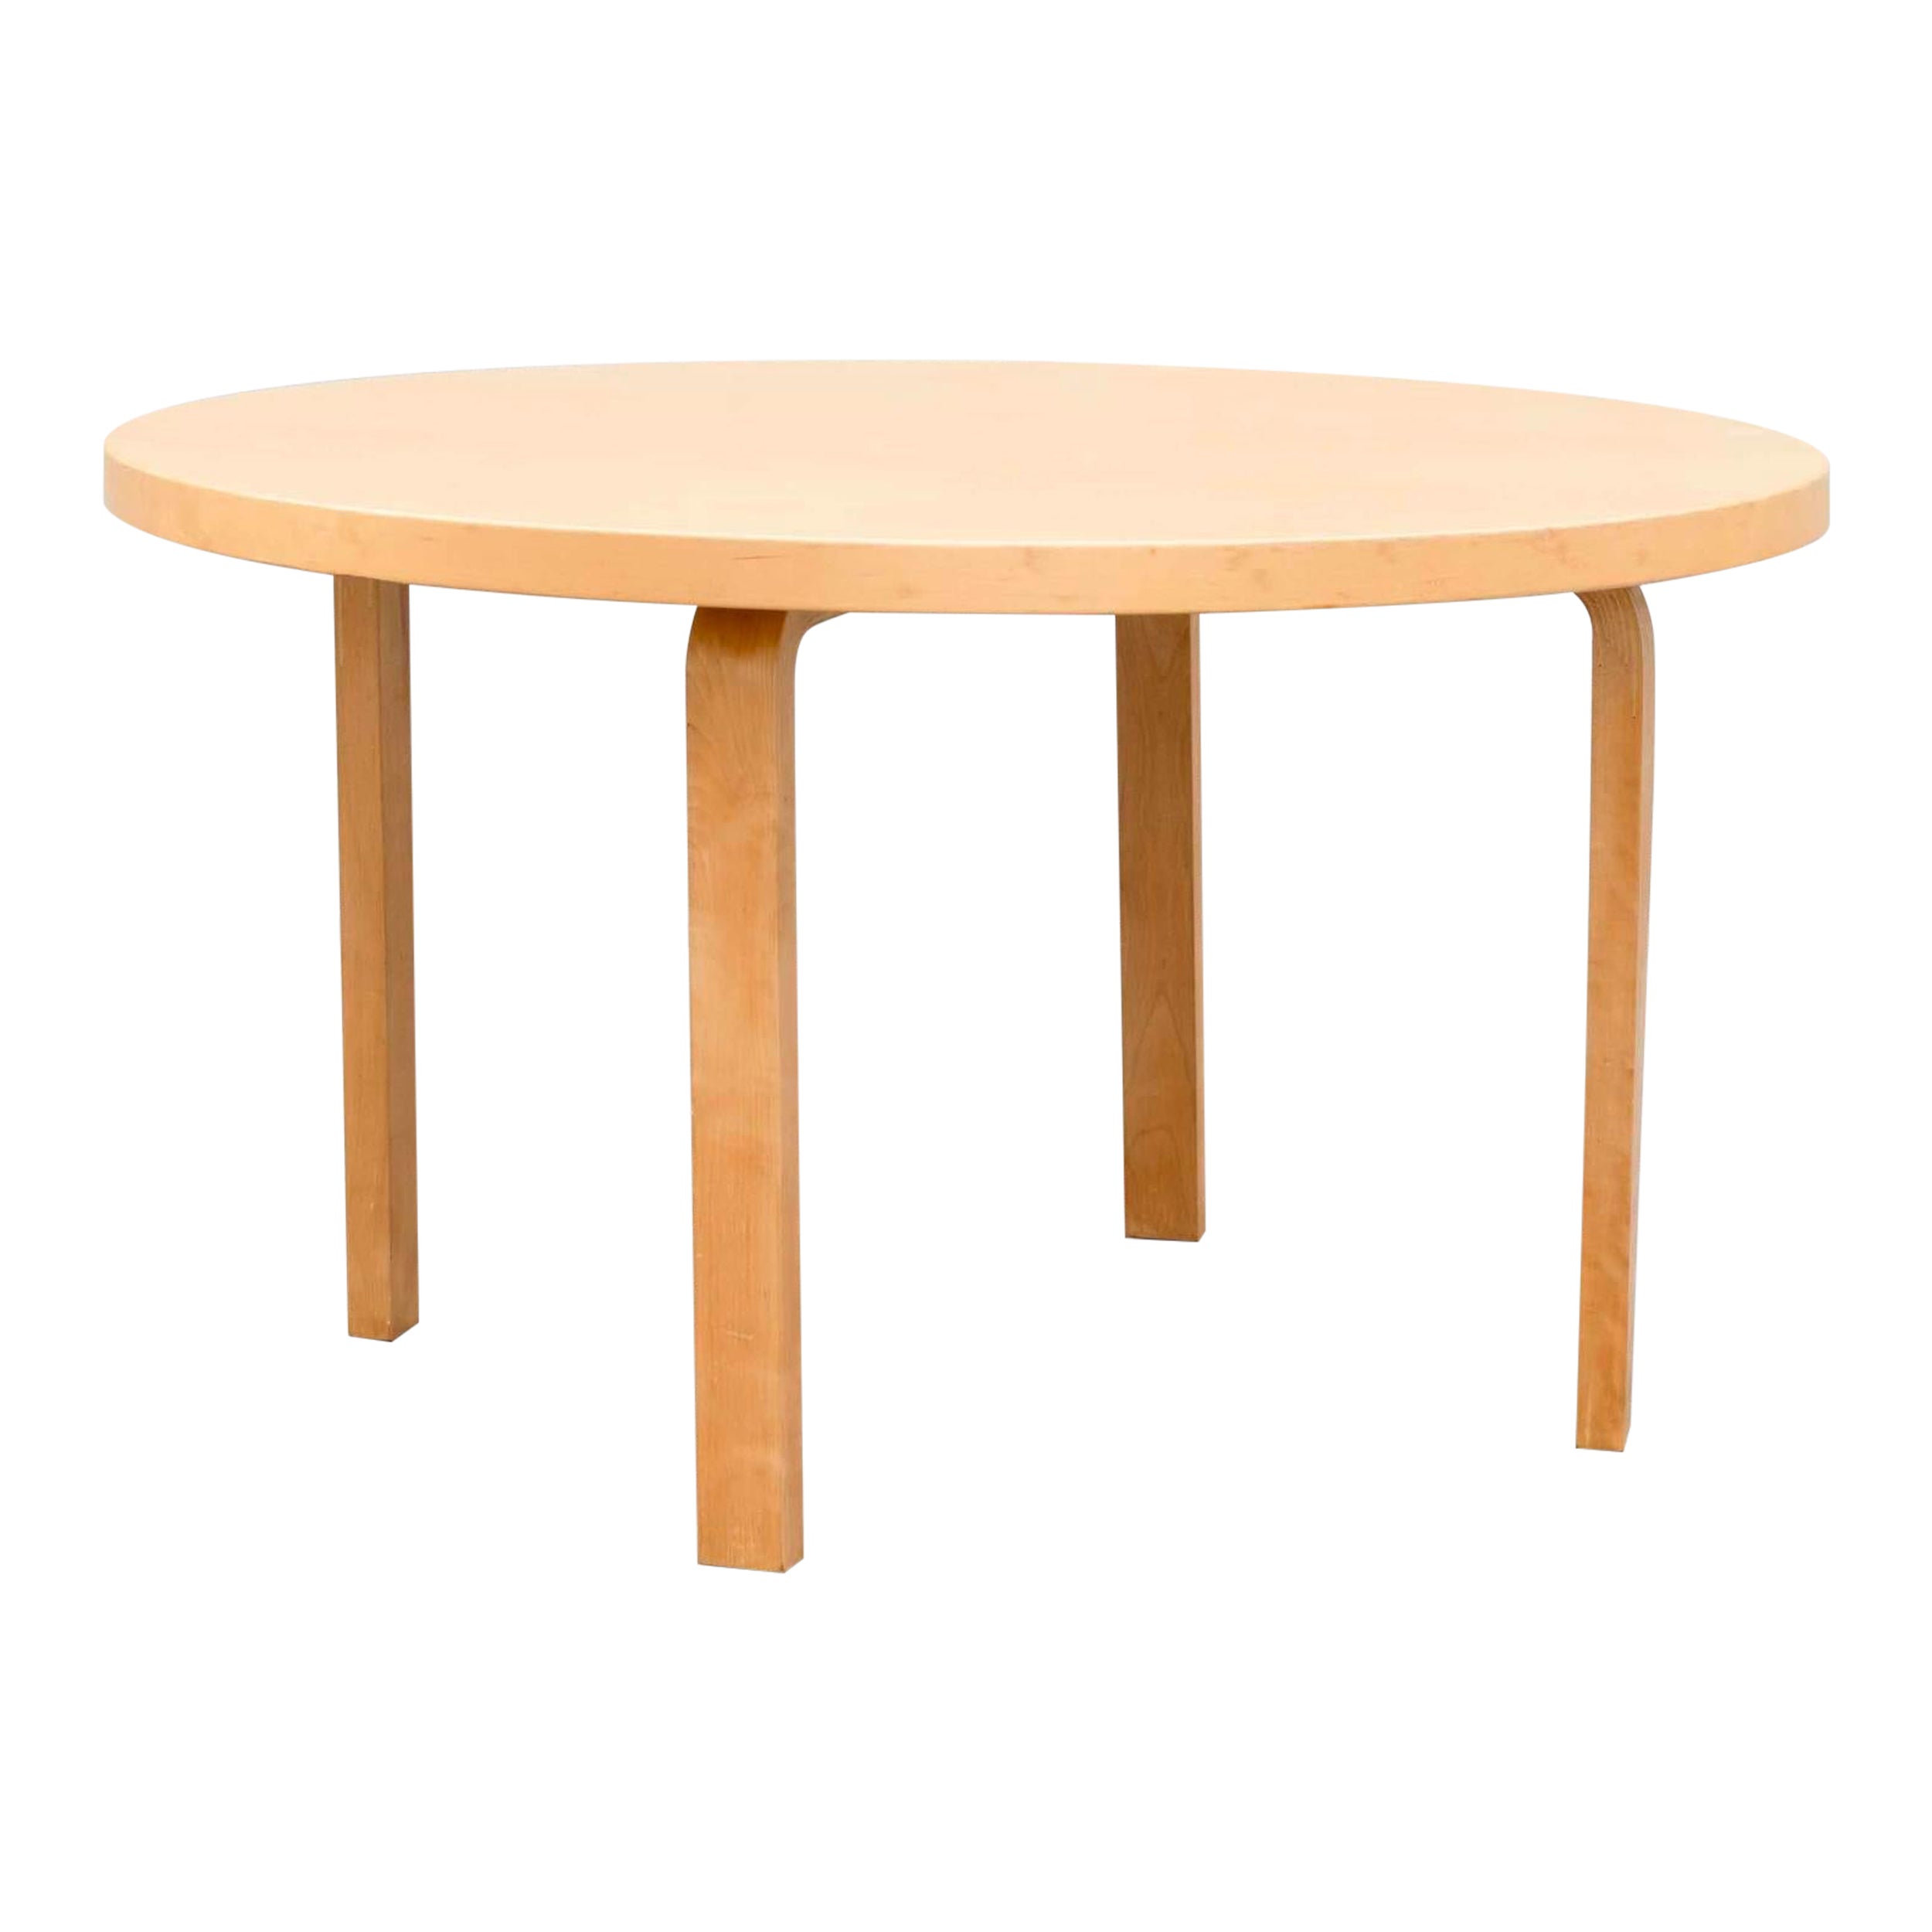 1960s Alvar Aalto Vintage Table 91 in Natural Birch Imported by Icf